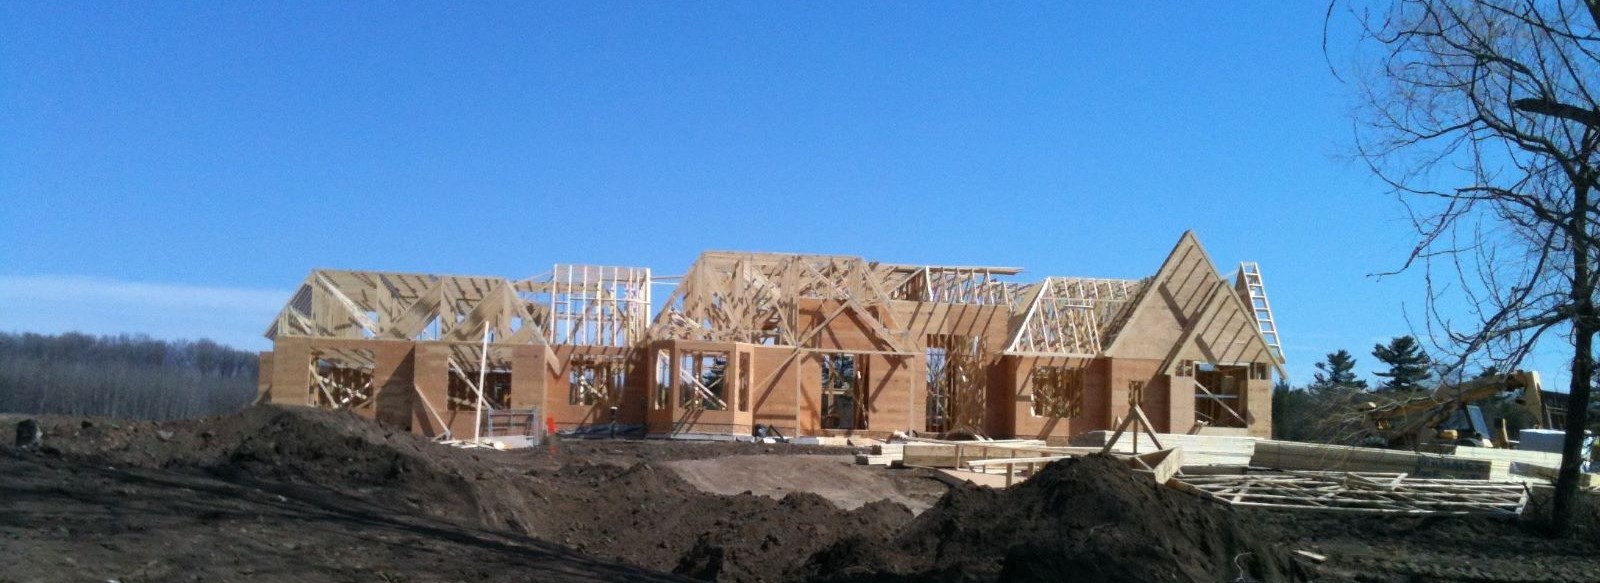 House being built by Keuning Construction